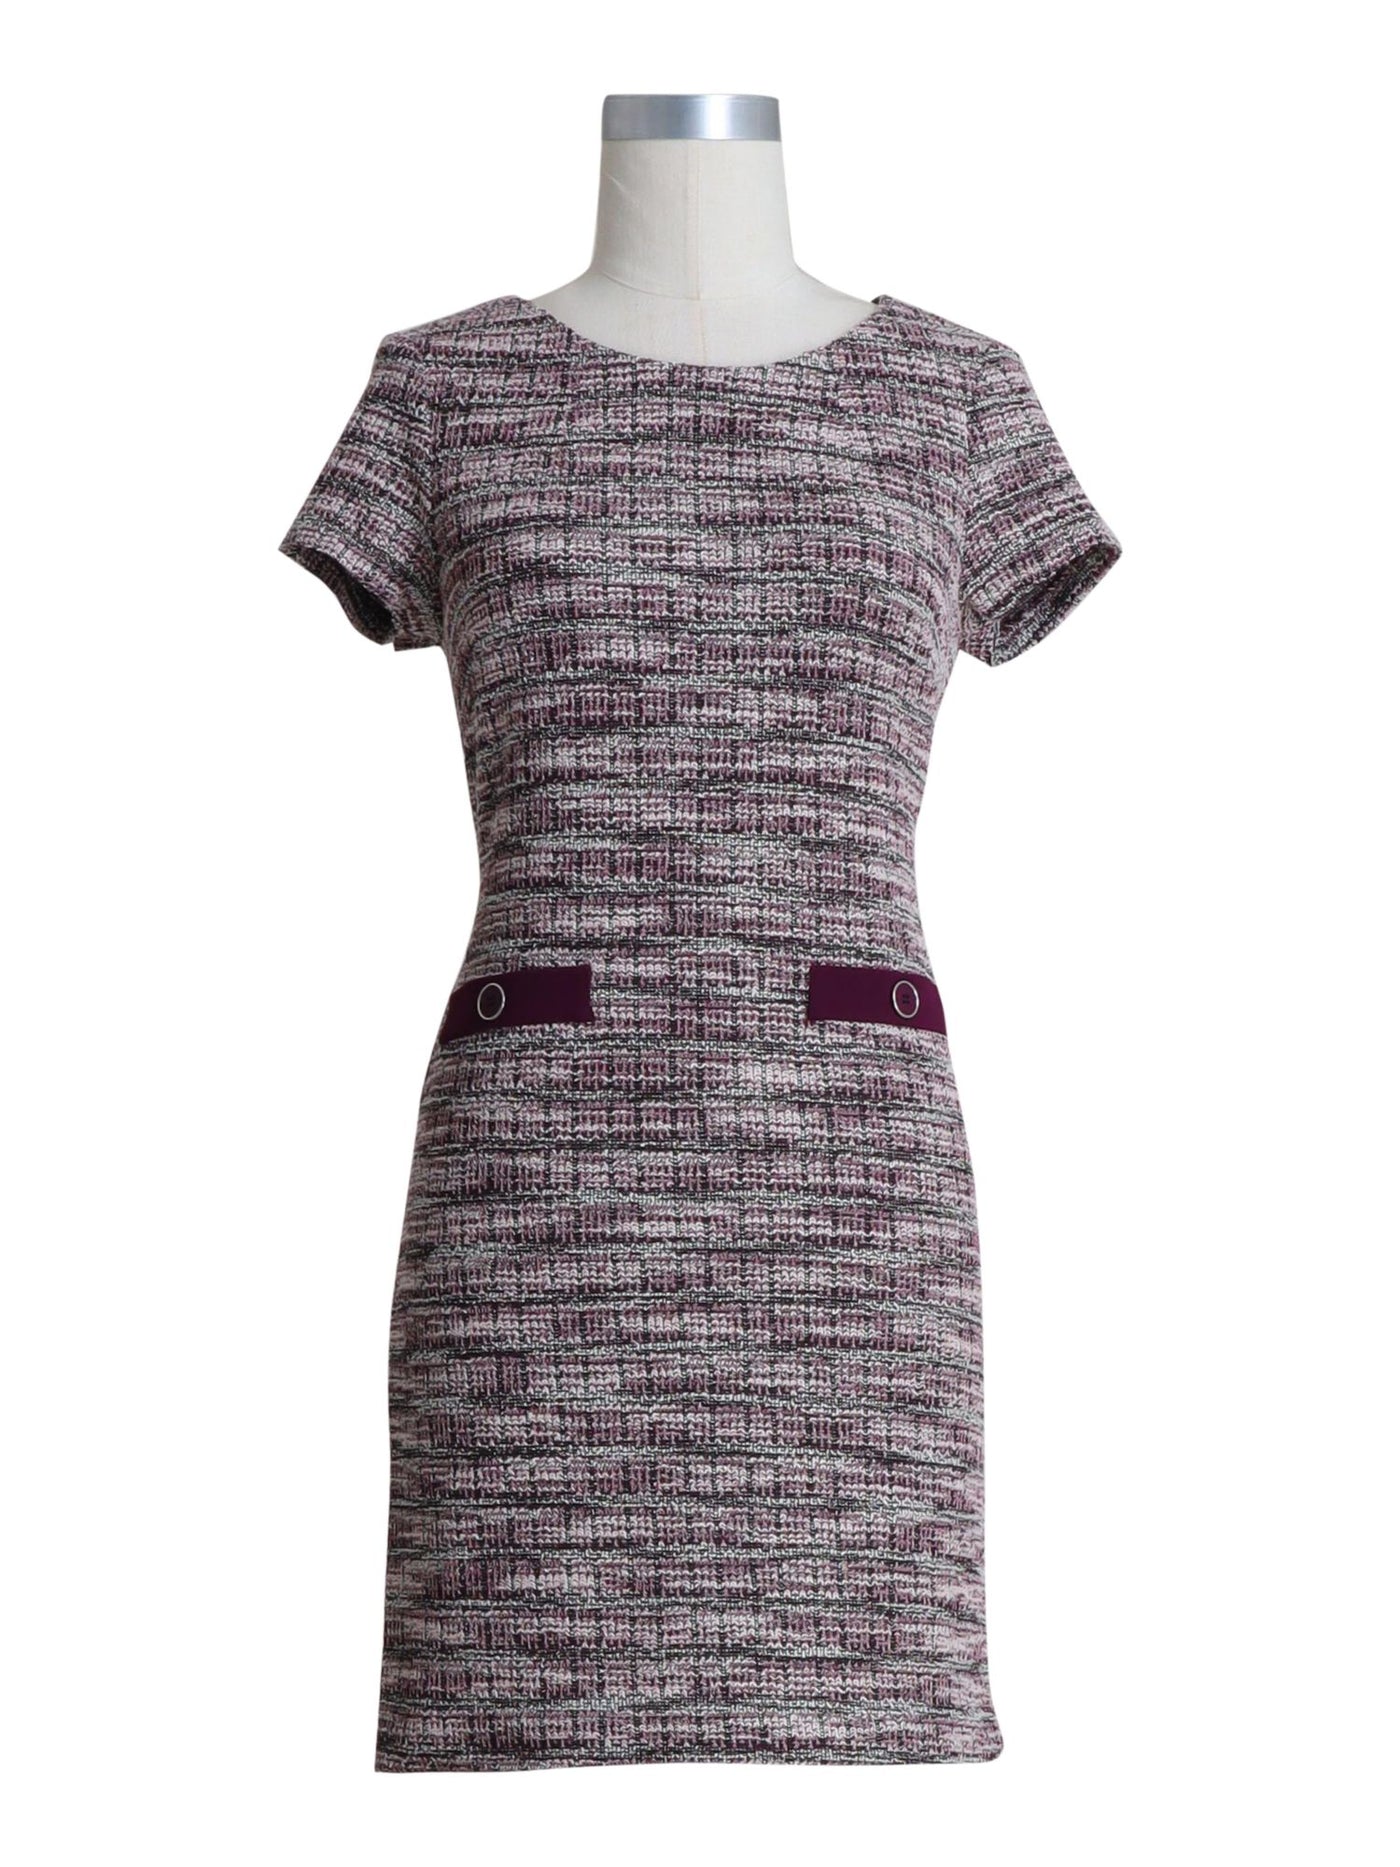 CONNECTED APPAREL Womens Burgundy Stretch Textured Welt-pocket-detail Tweed Short Sleeve Round Neck Above The Knee Wear To Work Sheath Dress Plus 18W